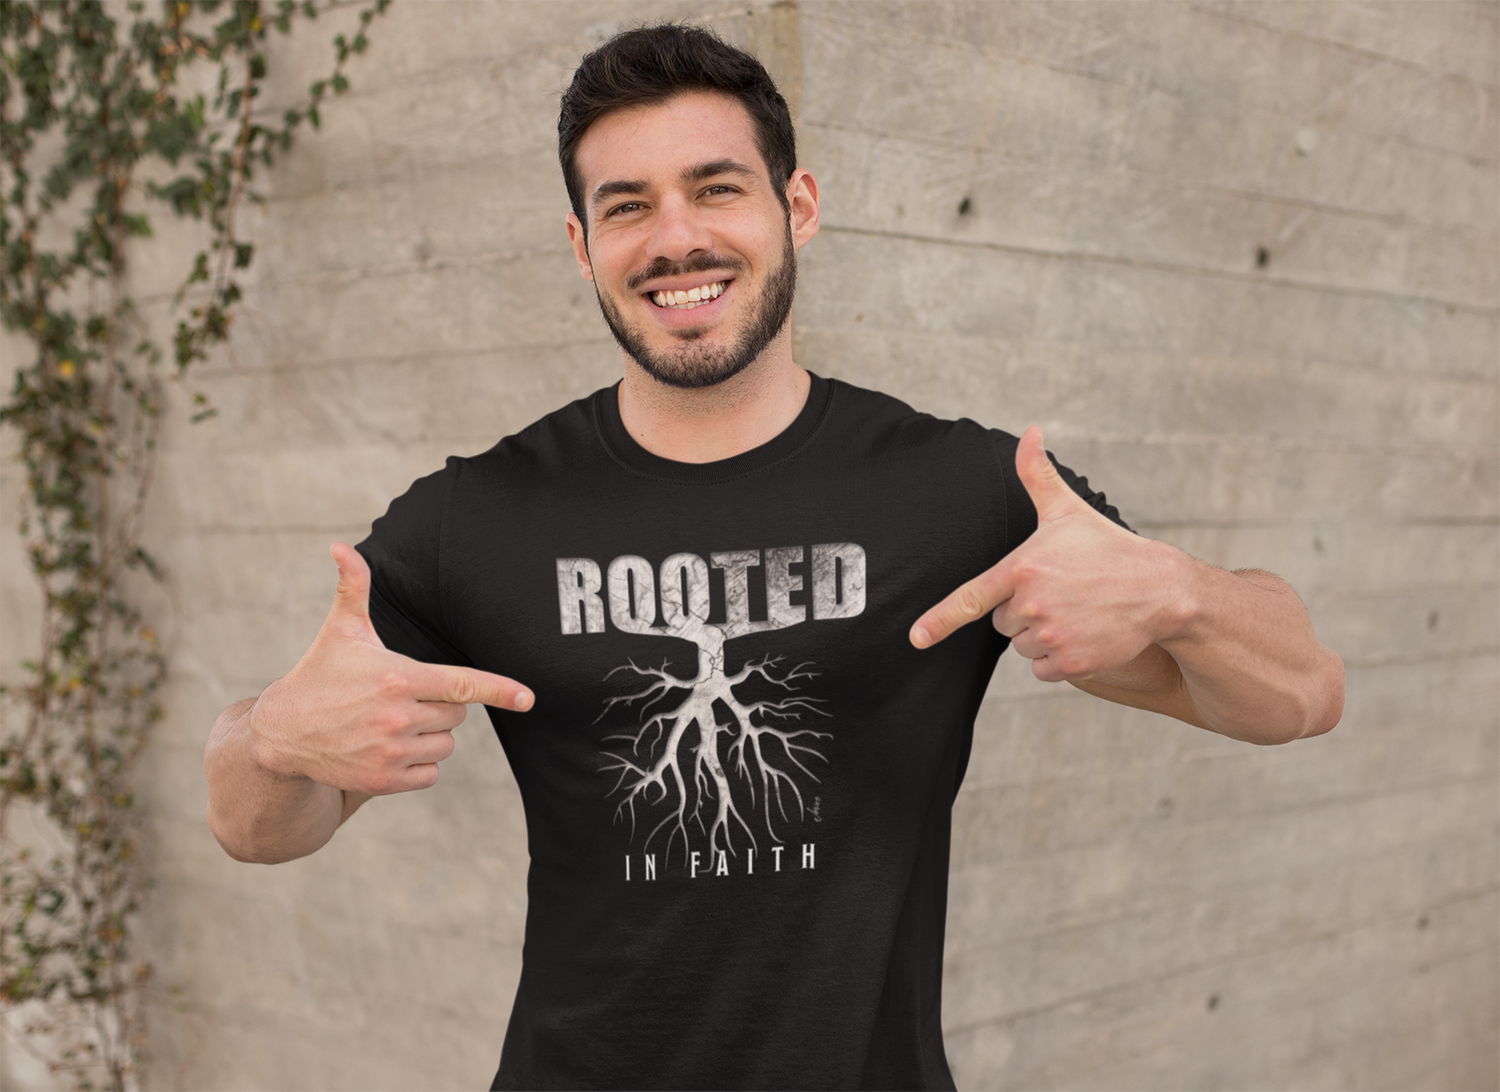 Rooted in Faith Black Cotton T-Shirt - Embrace Your Spiritual Journey in Style with this Comfortable and Meaningful Christian Apparel